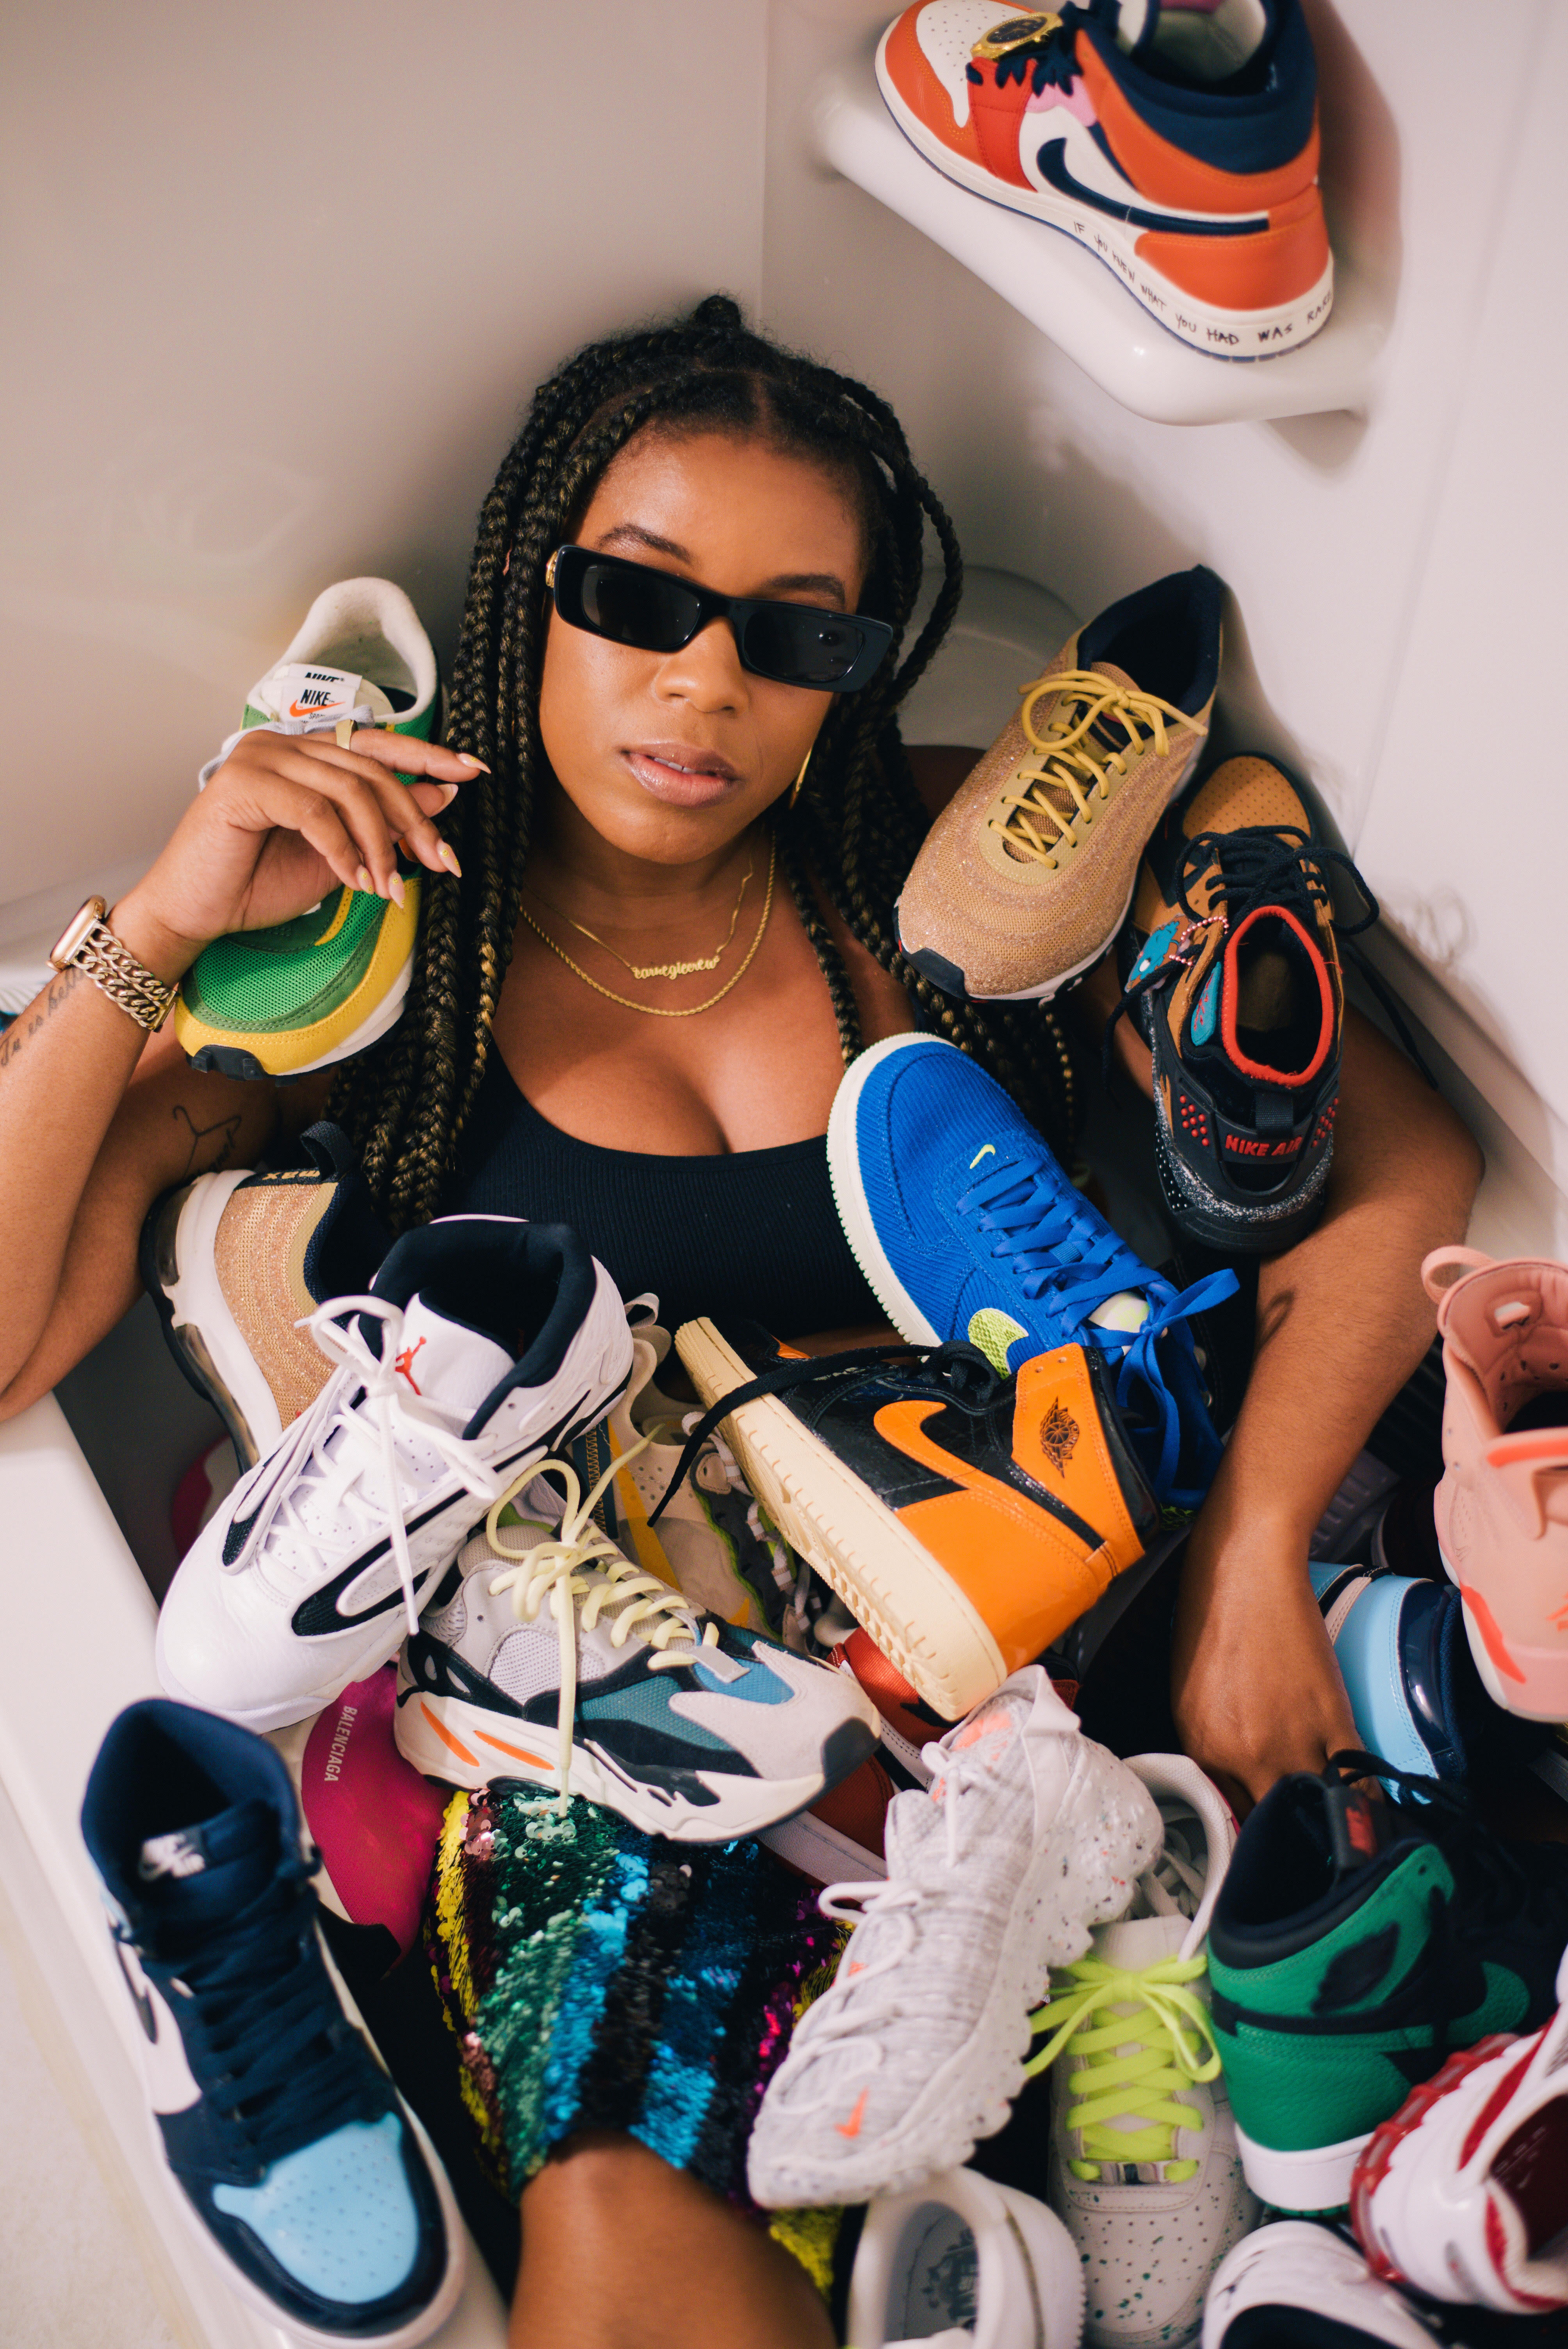 Meet the New Teen Sneakerheads Flipping Shoes for Cash, Fast